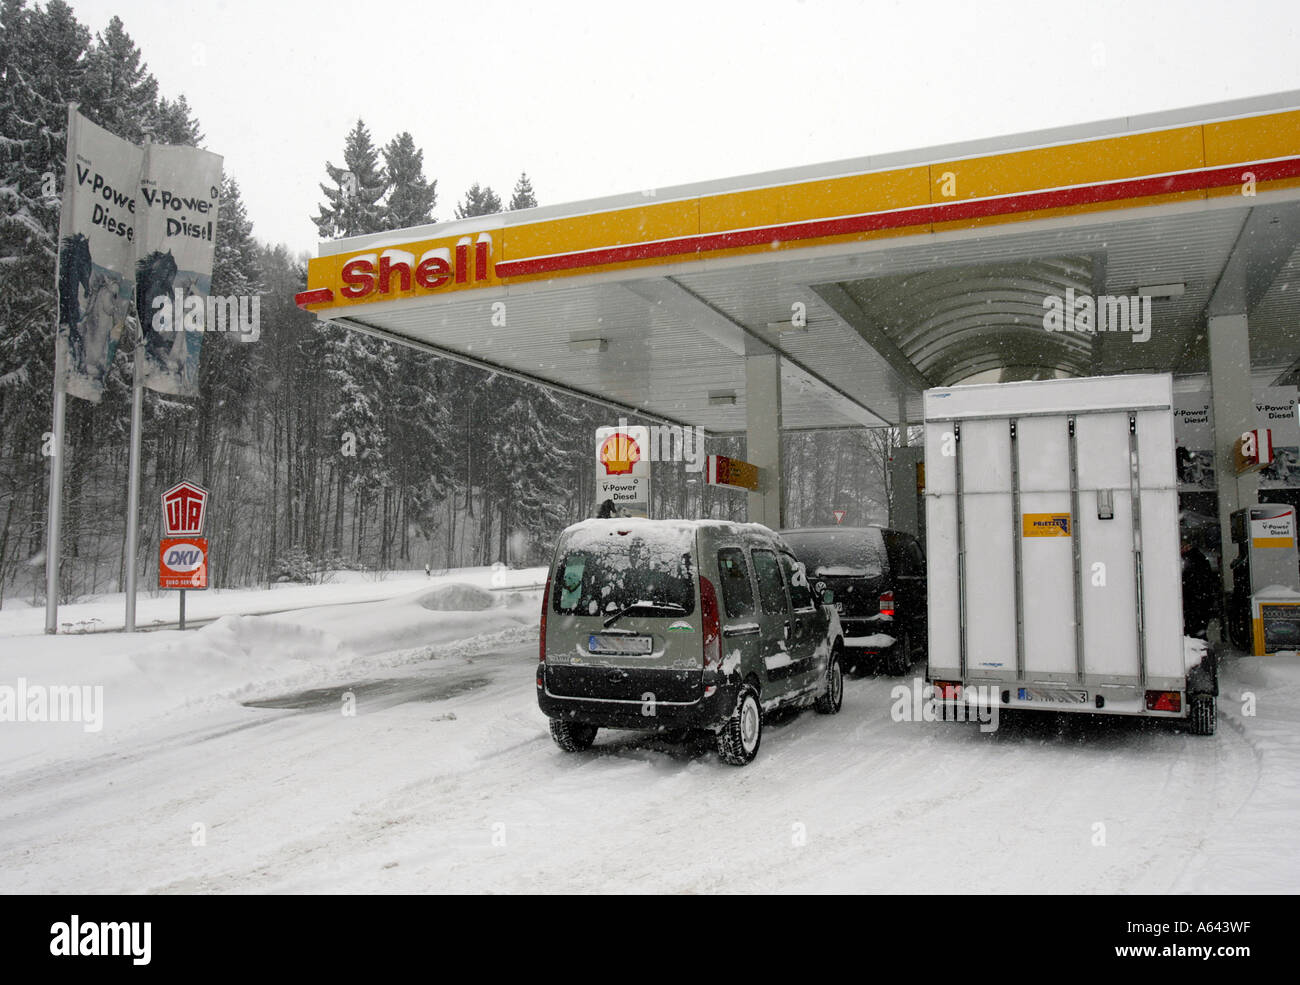 Cars at a Shell gas station in winter, Saxony, Germany Stock Photo